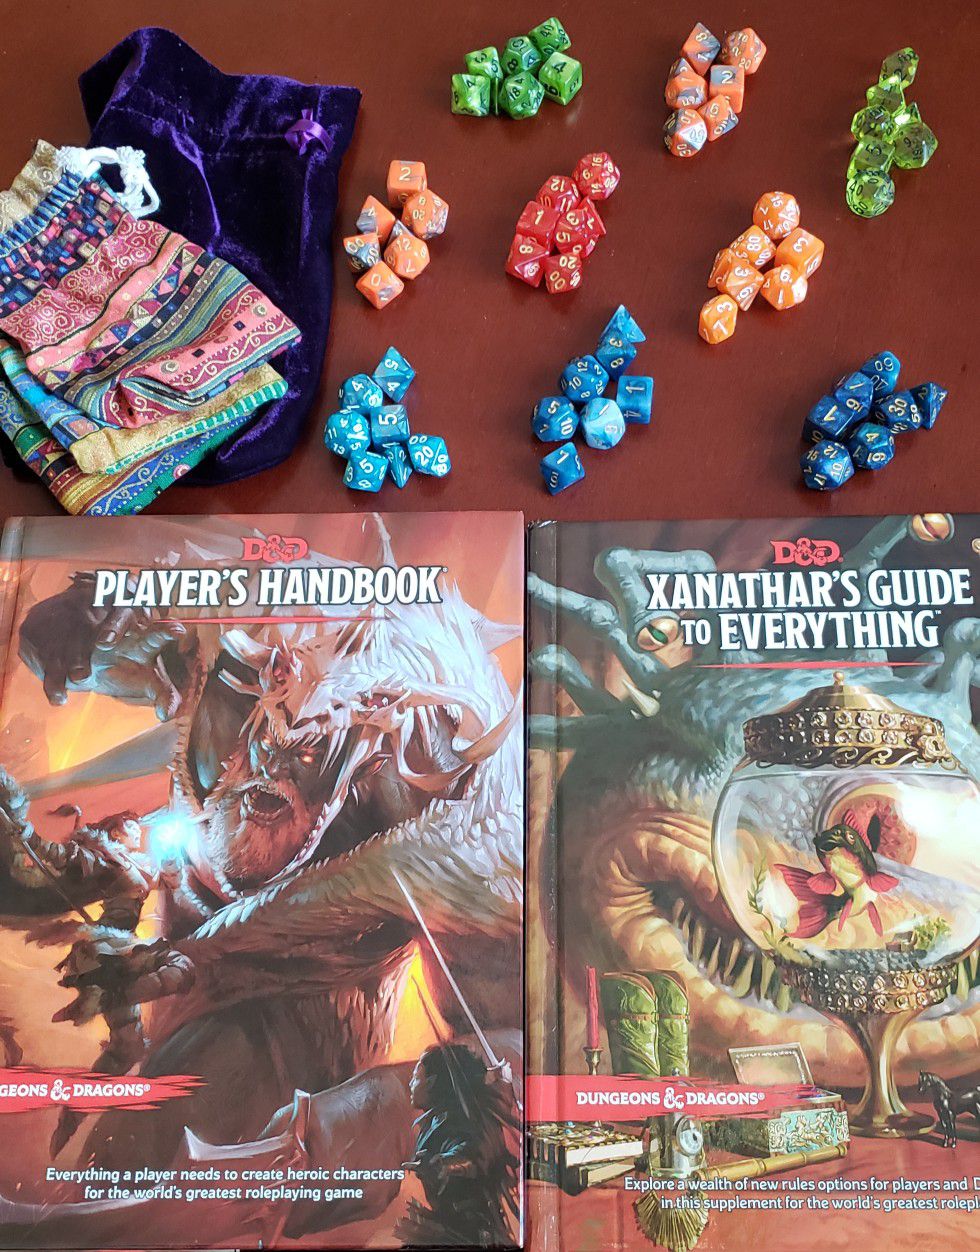 D&D Books and Dice